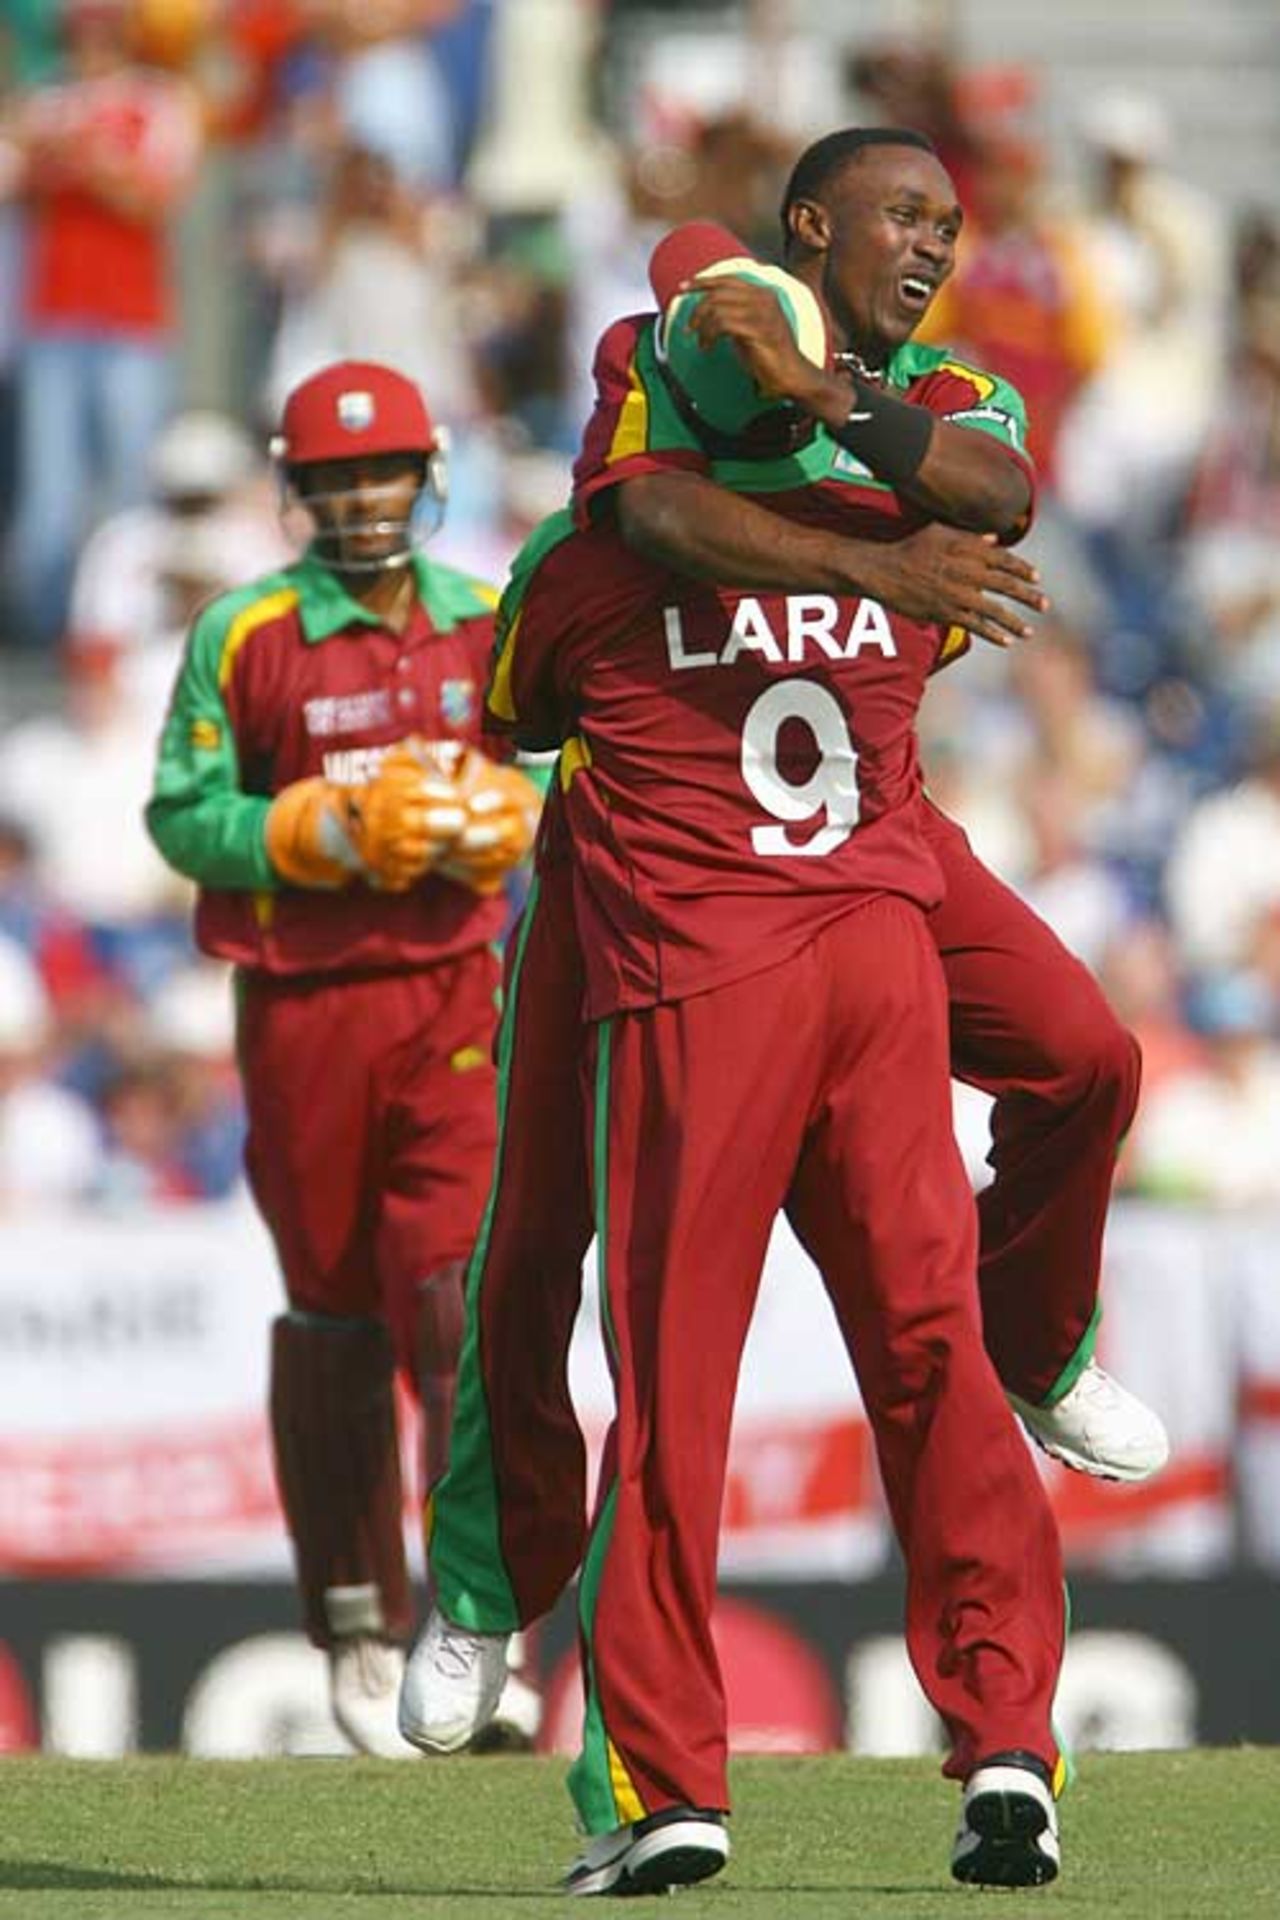 Dwayne Bravo sparked West Indies into life with two run outs a wicket, England v West Indies, Super Eights, Barbados, April 21, 2007